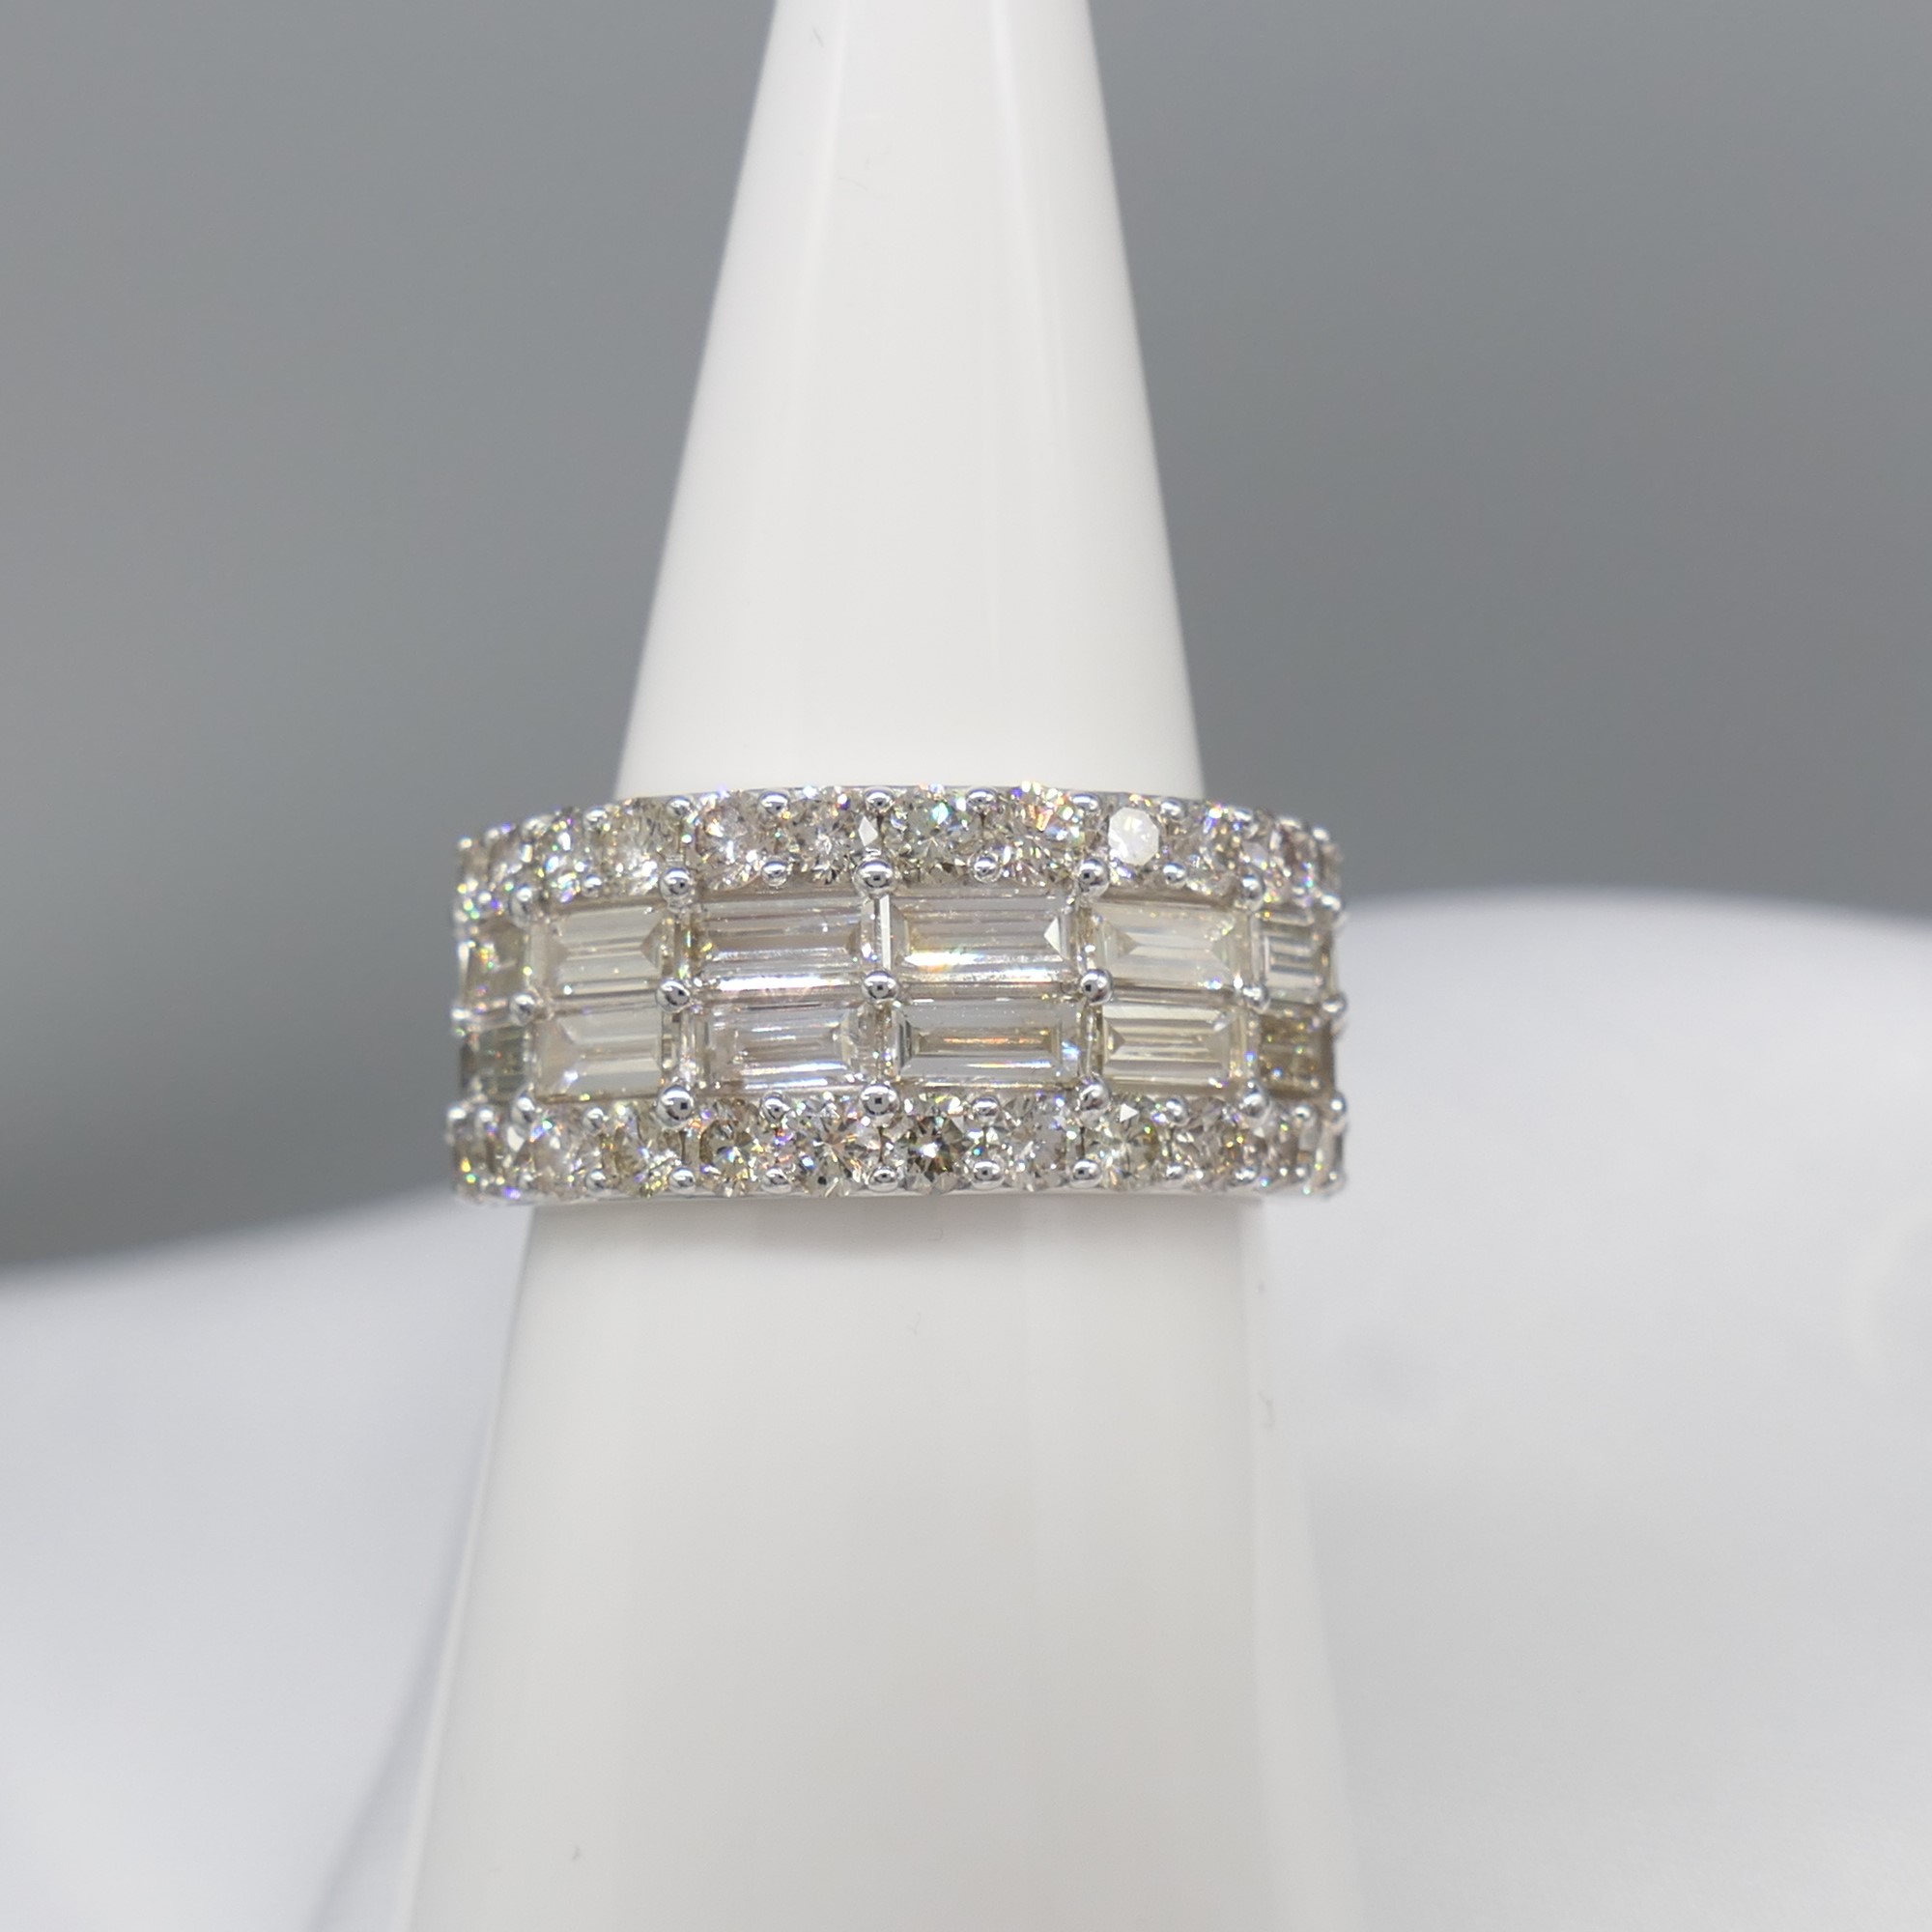 2.72 Carat Round Brilliant-Cut and Baguette-Cut Diamond Cocktail Ring - Image 3 of 6